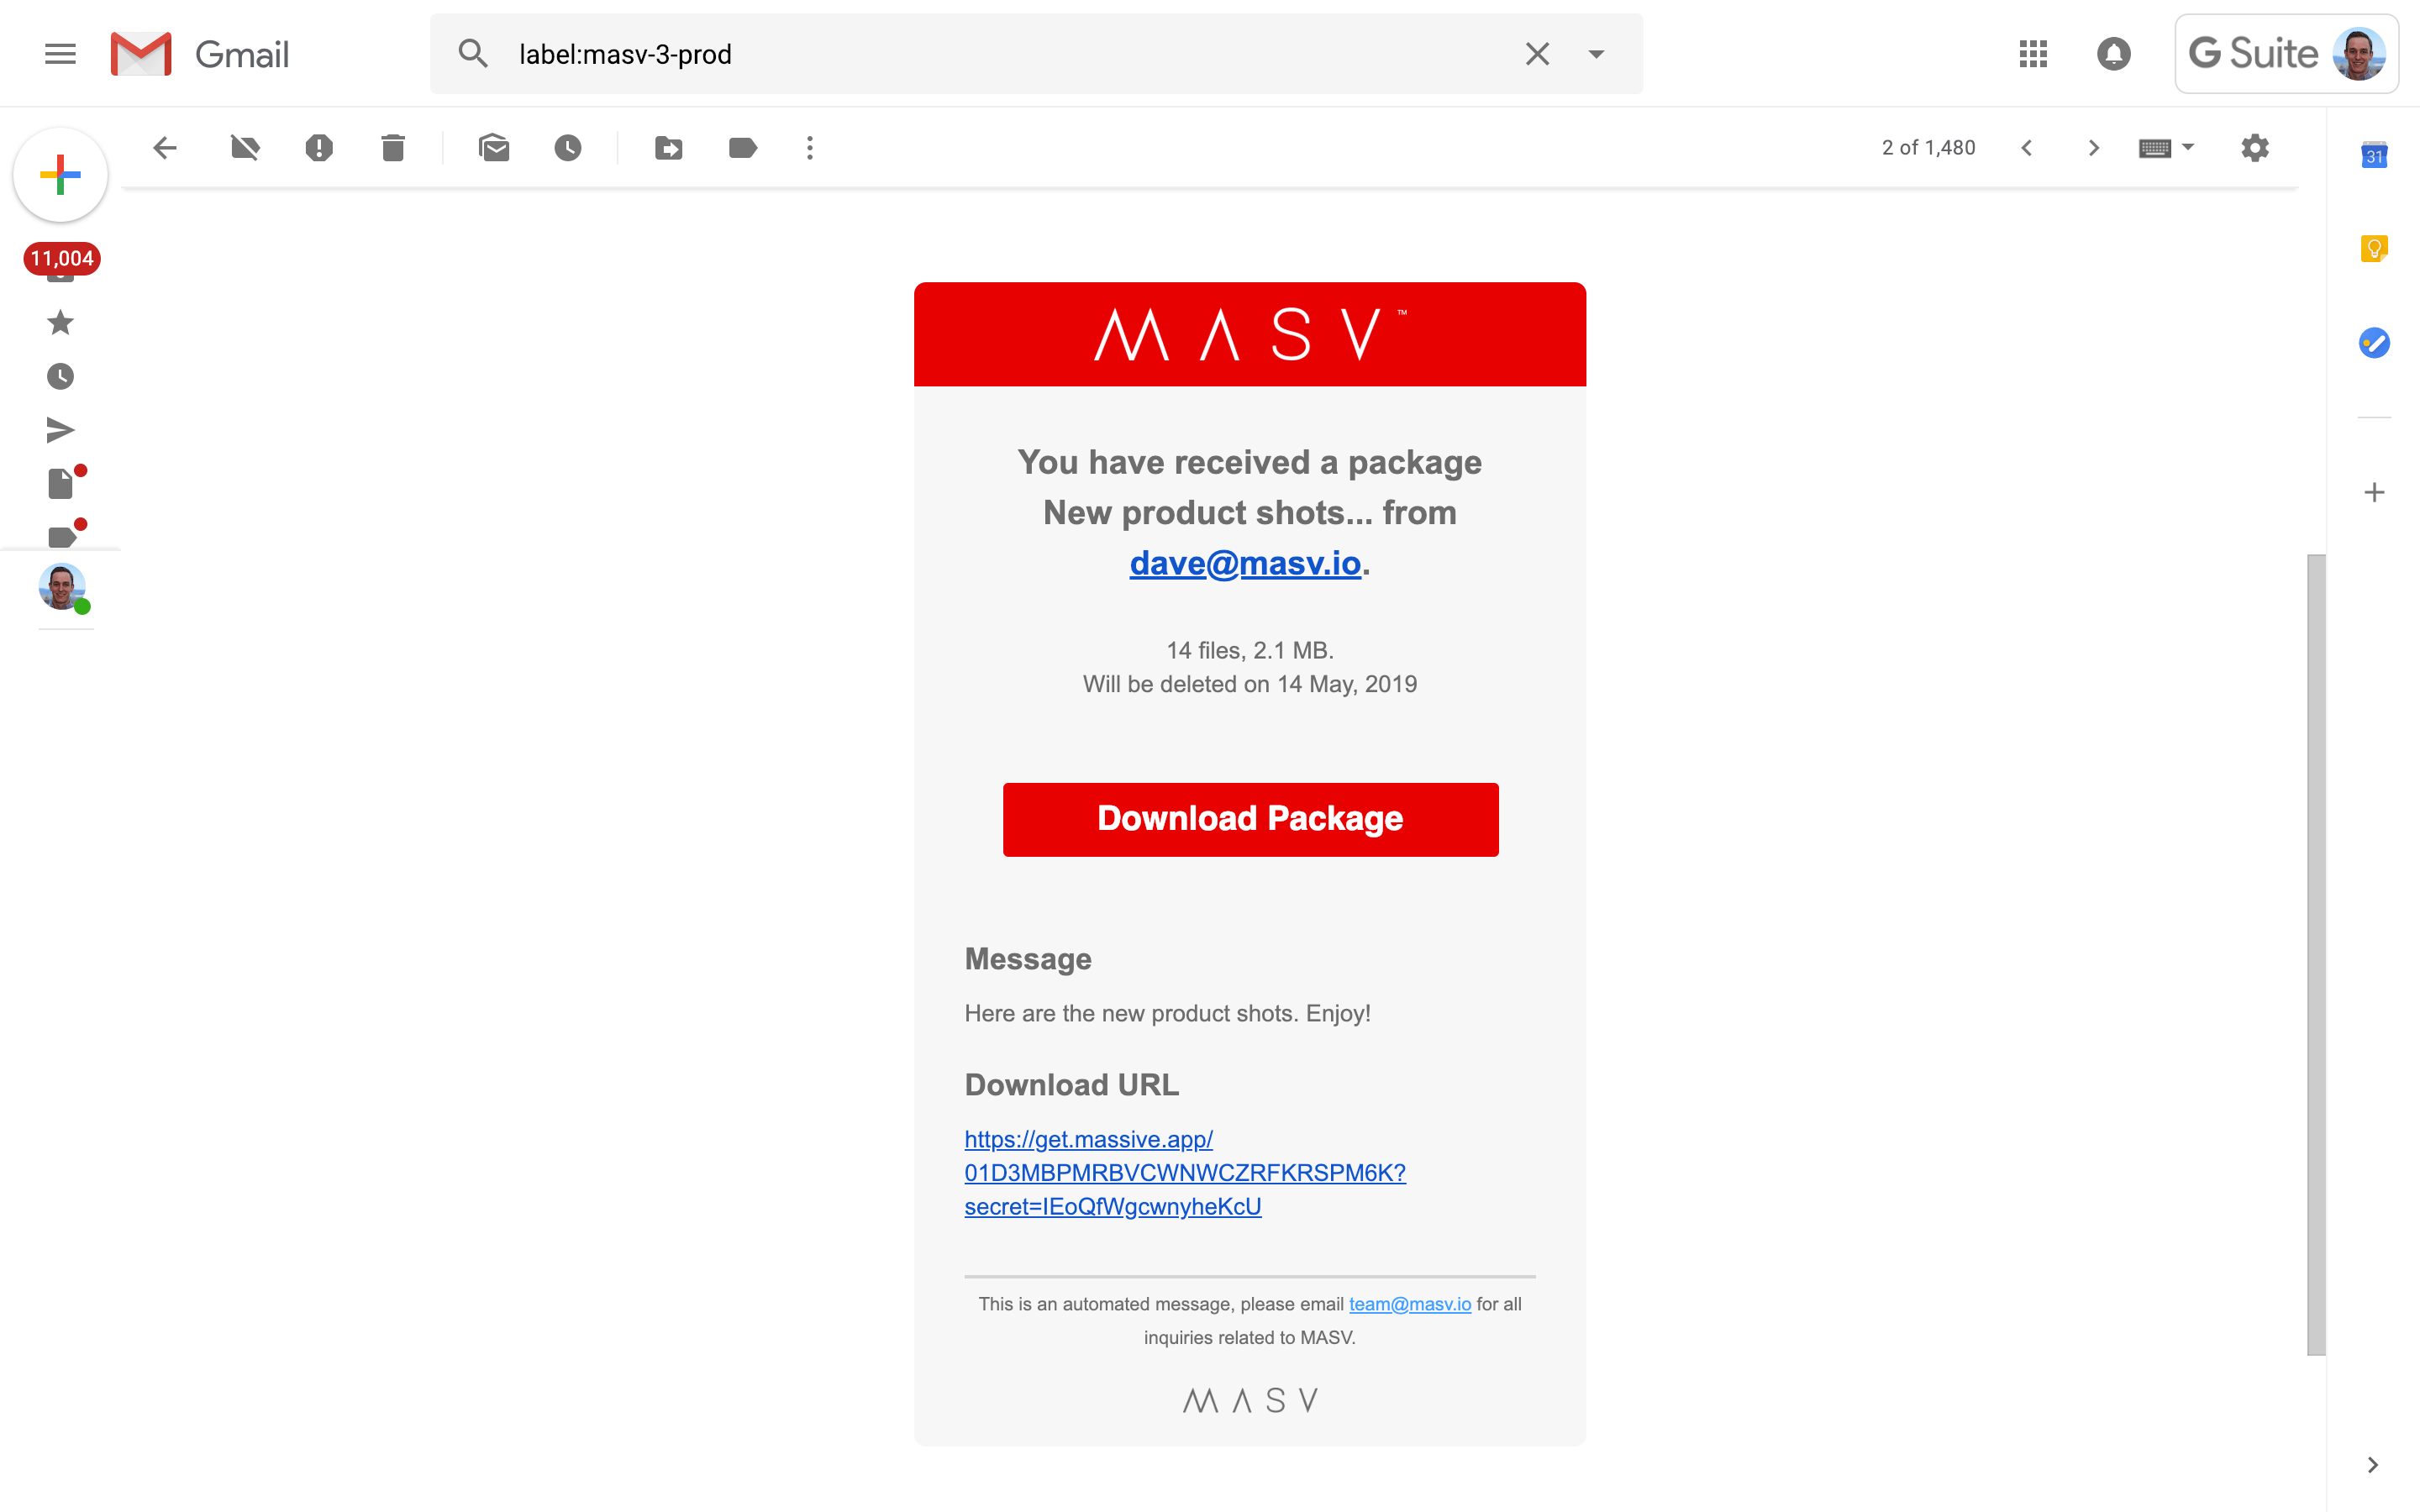 MASV is robust enough to recover from your stalled uploads automatically and send you notification as soon as the transfer is complete.